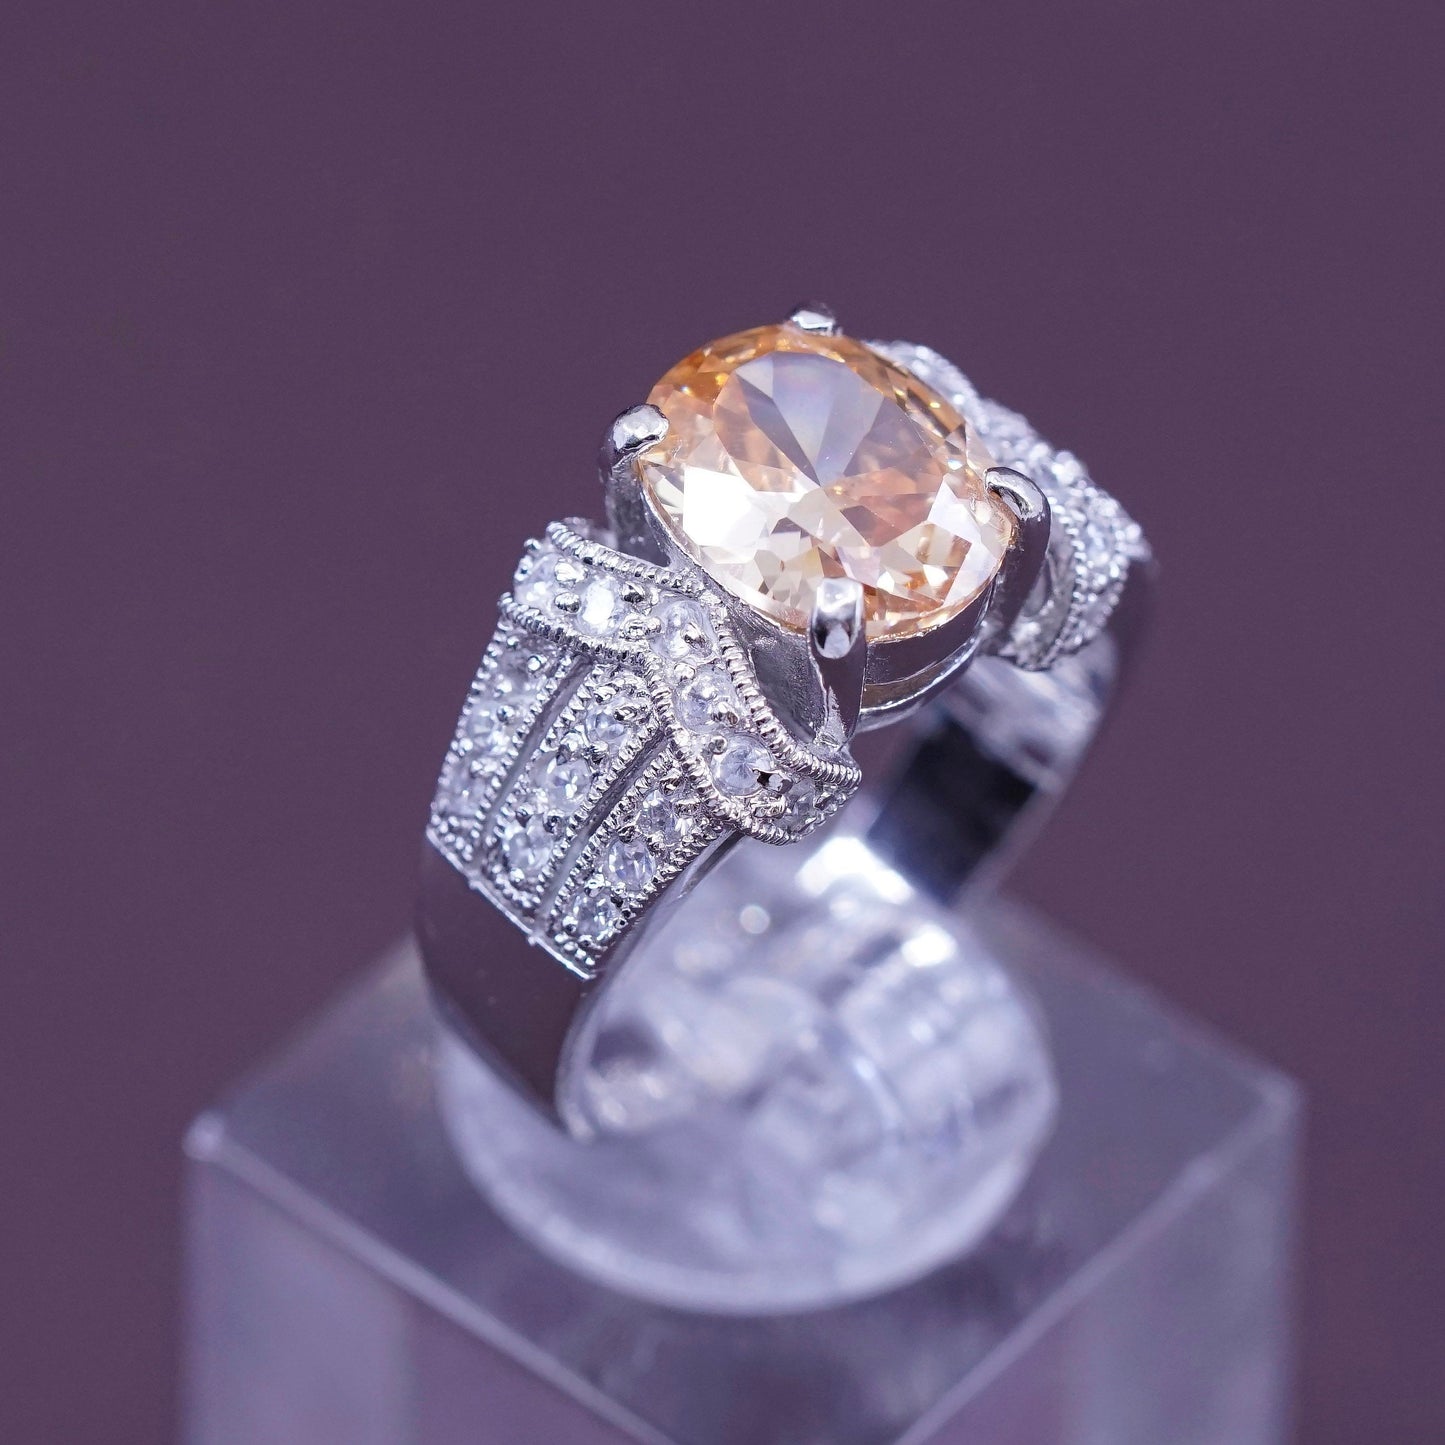 Size 7.5, vintage Sterling 925 silver handmade ring with orange citrine and cz